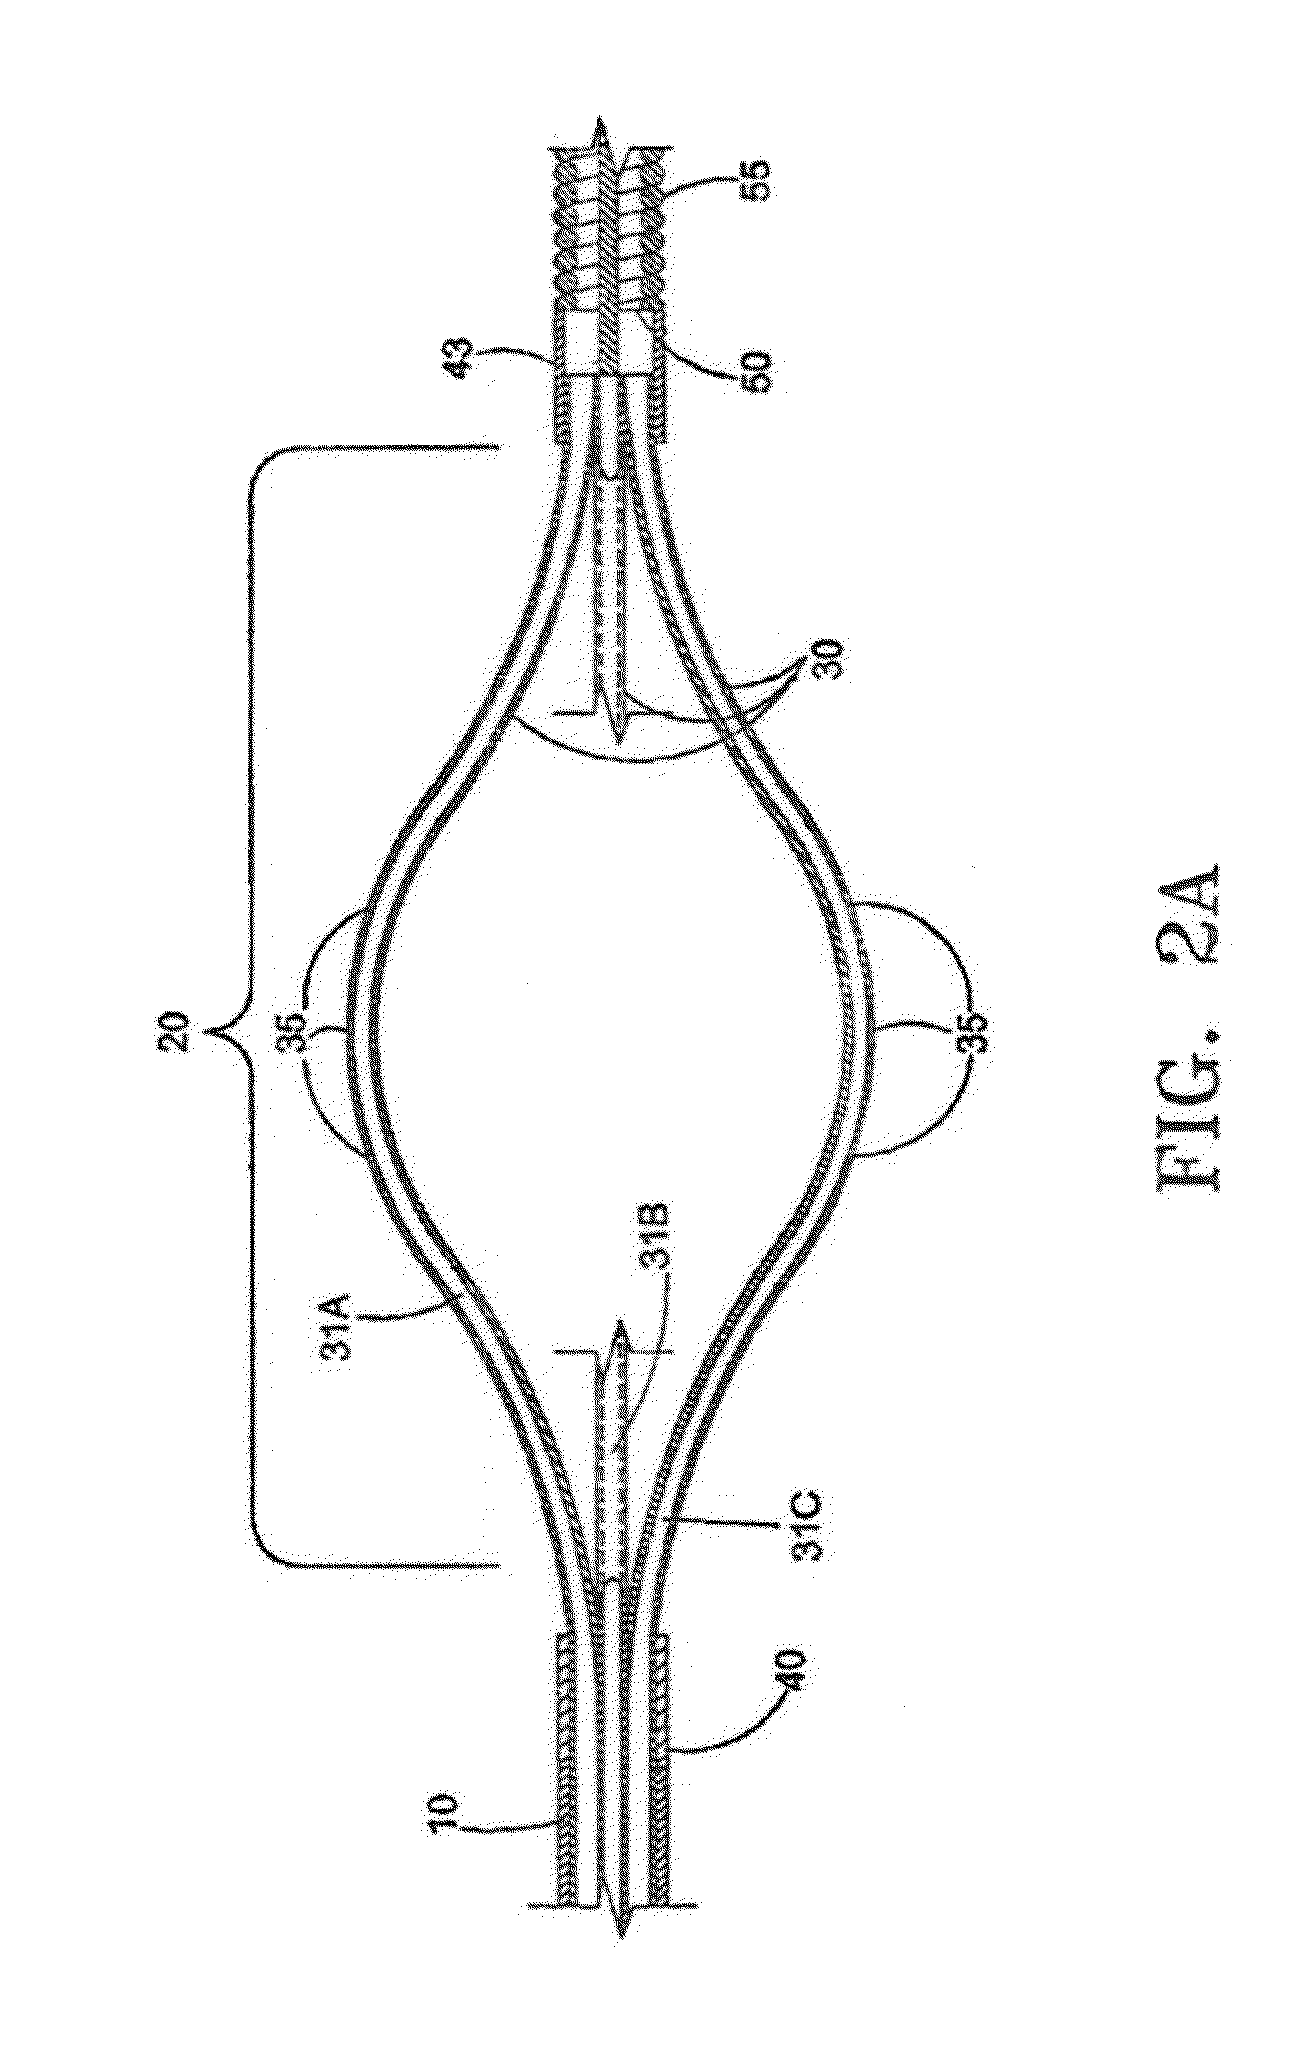 Fluid Delivery and Treatment Device and Method of Use